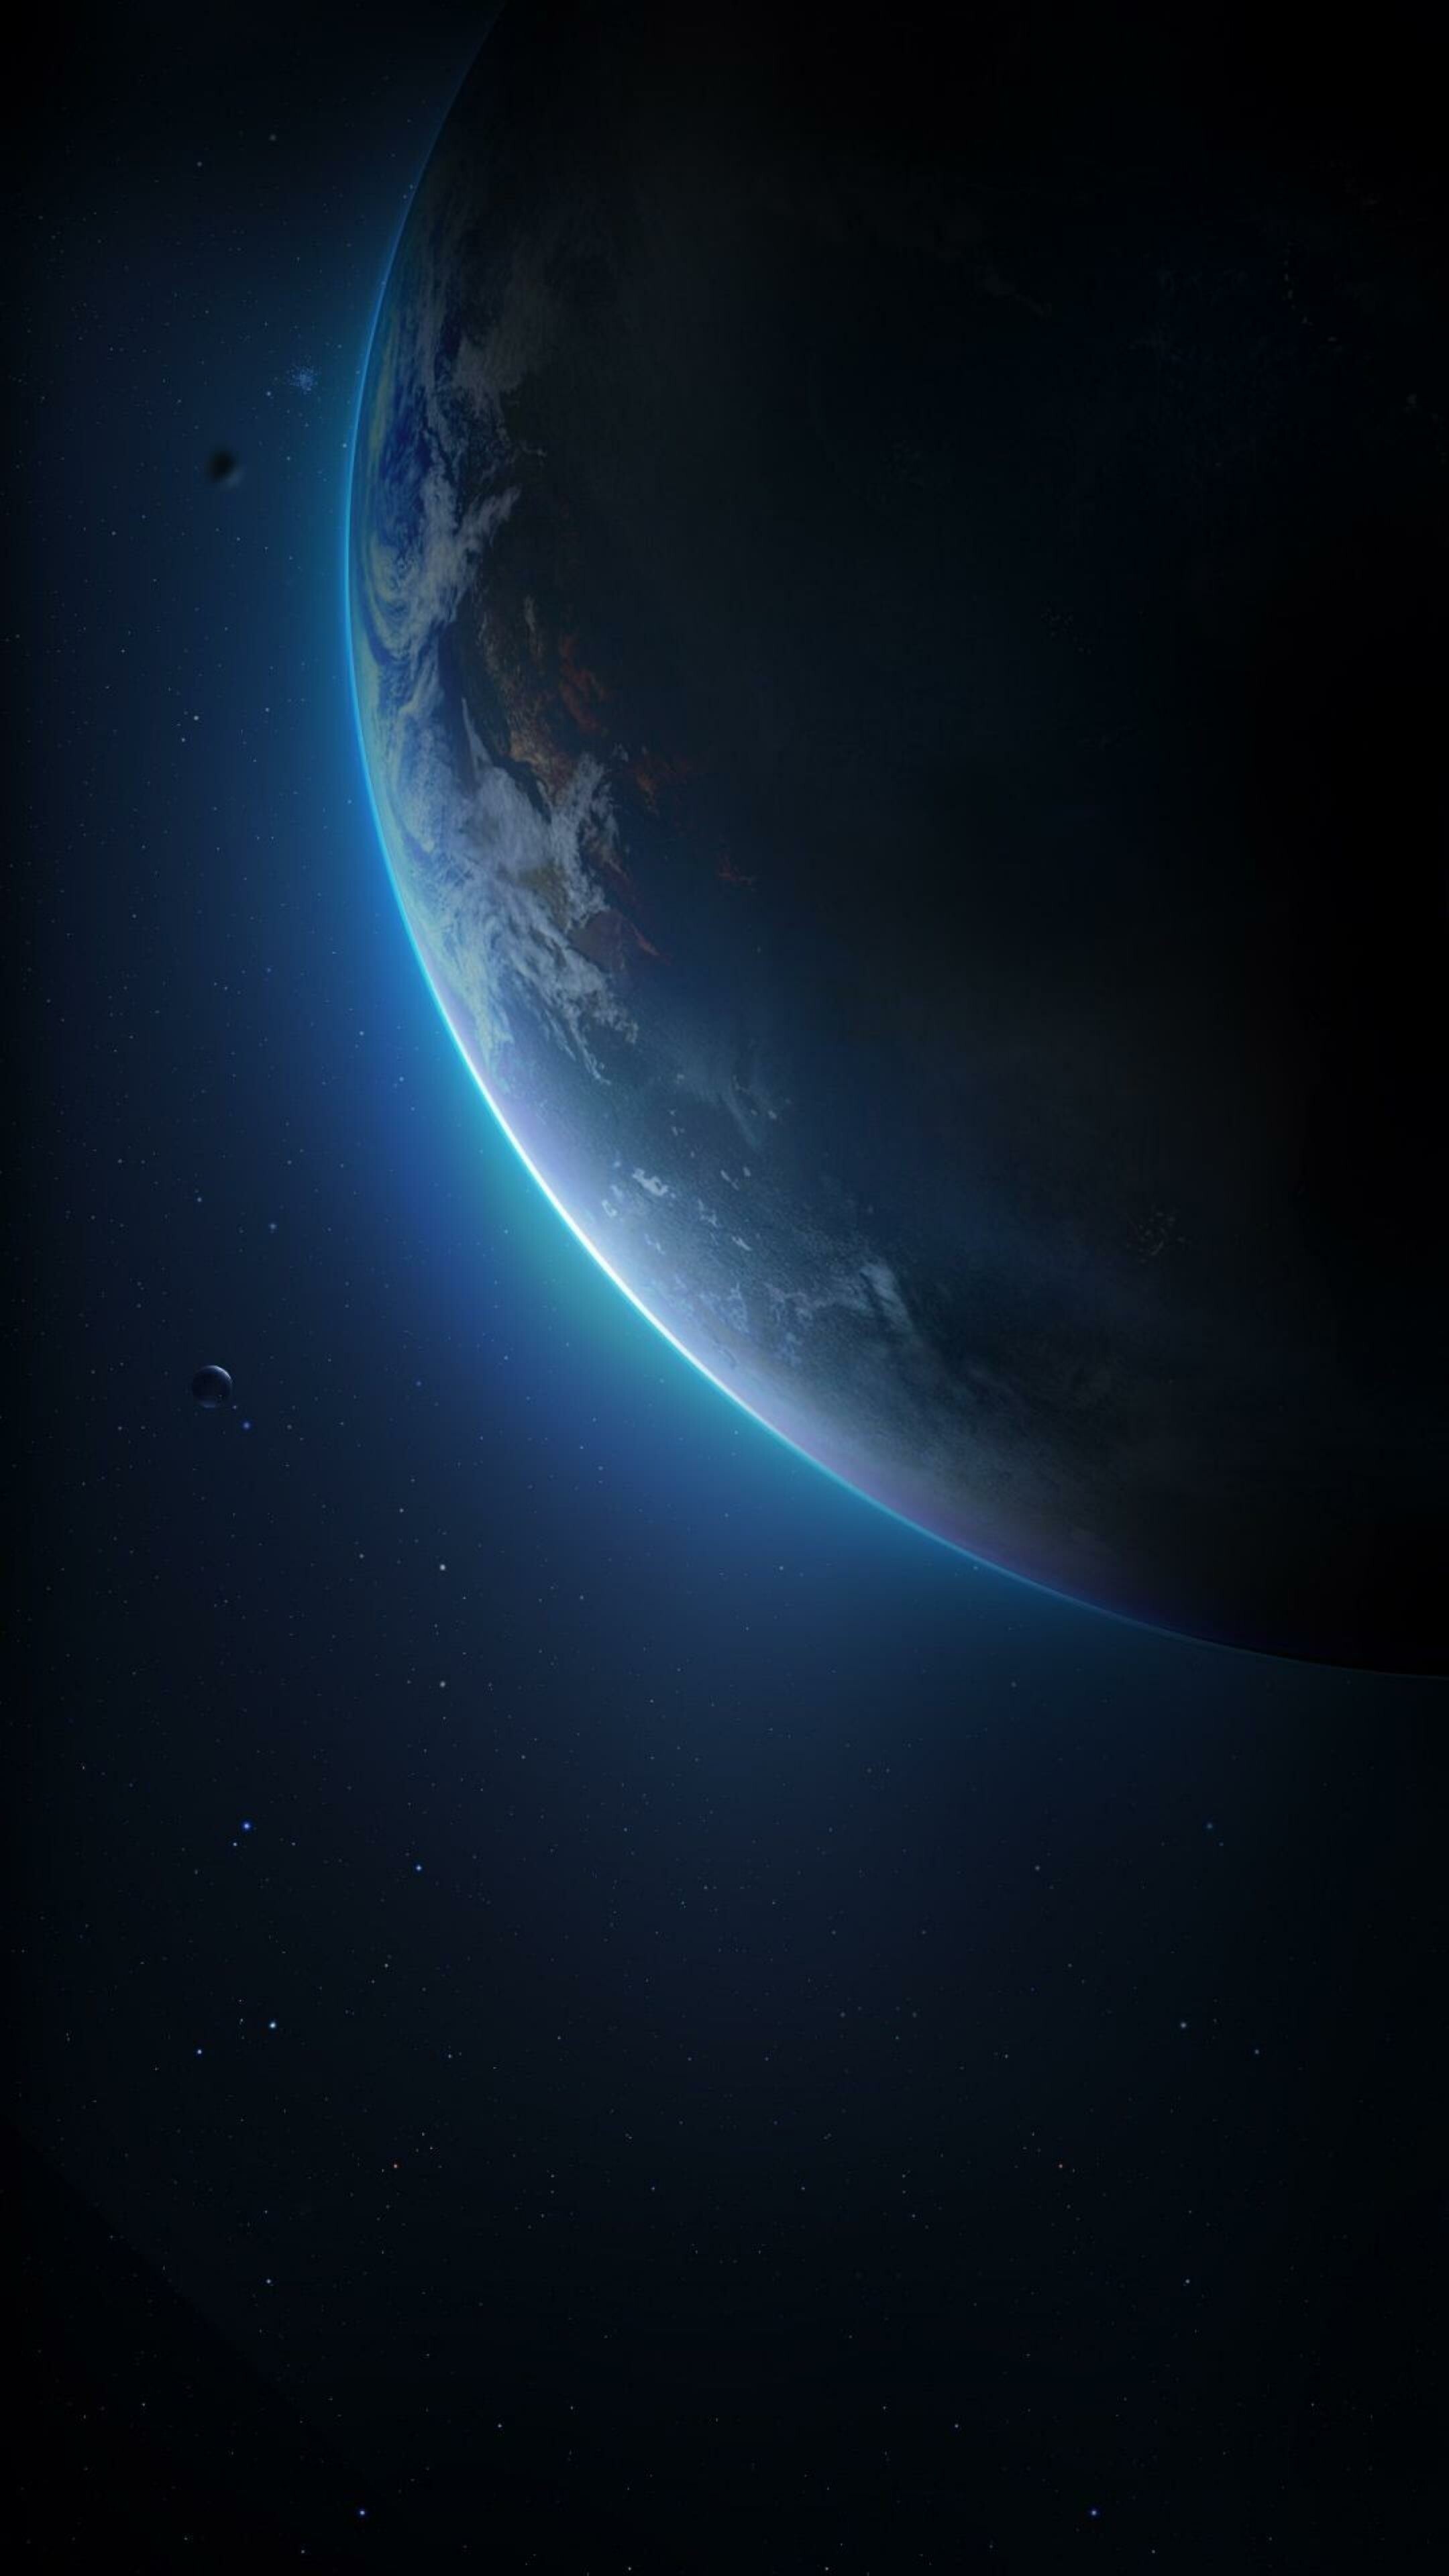 Planet: A large celestial body that revolves around the sun in fixed orbits. 2160x3840 4K Wallpaper.